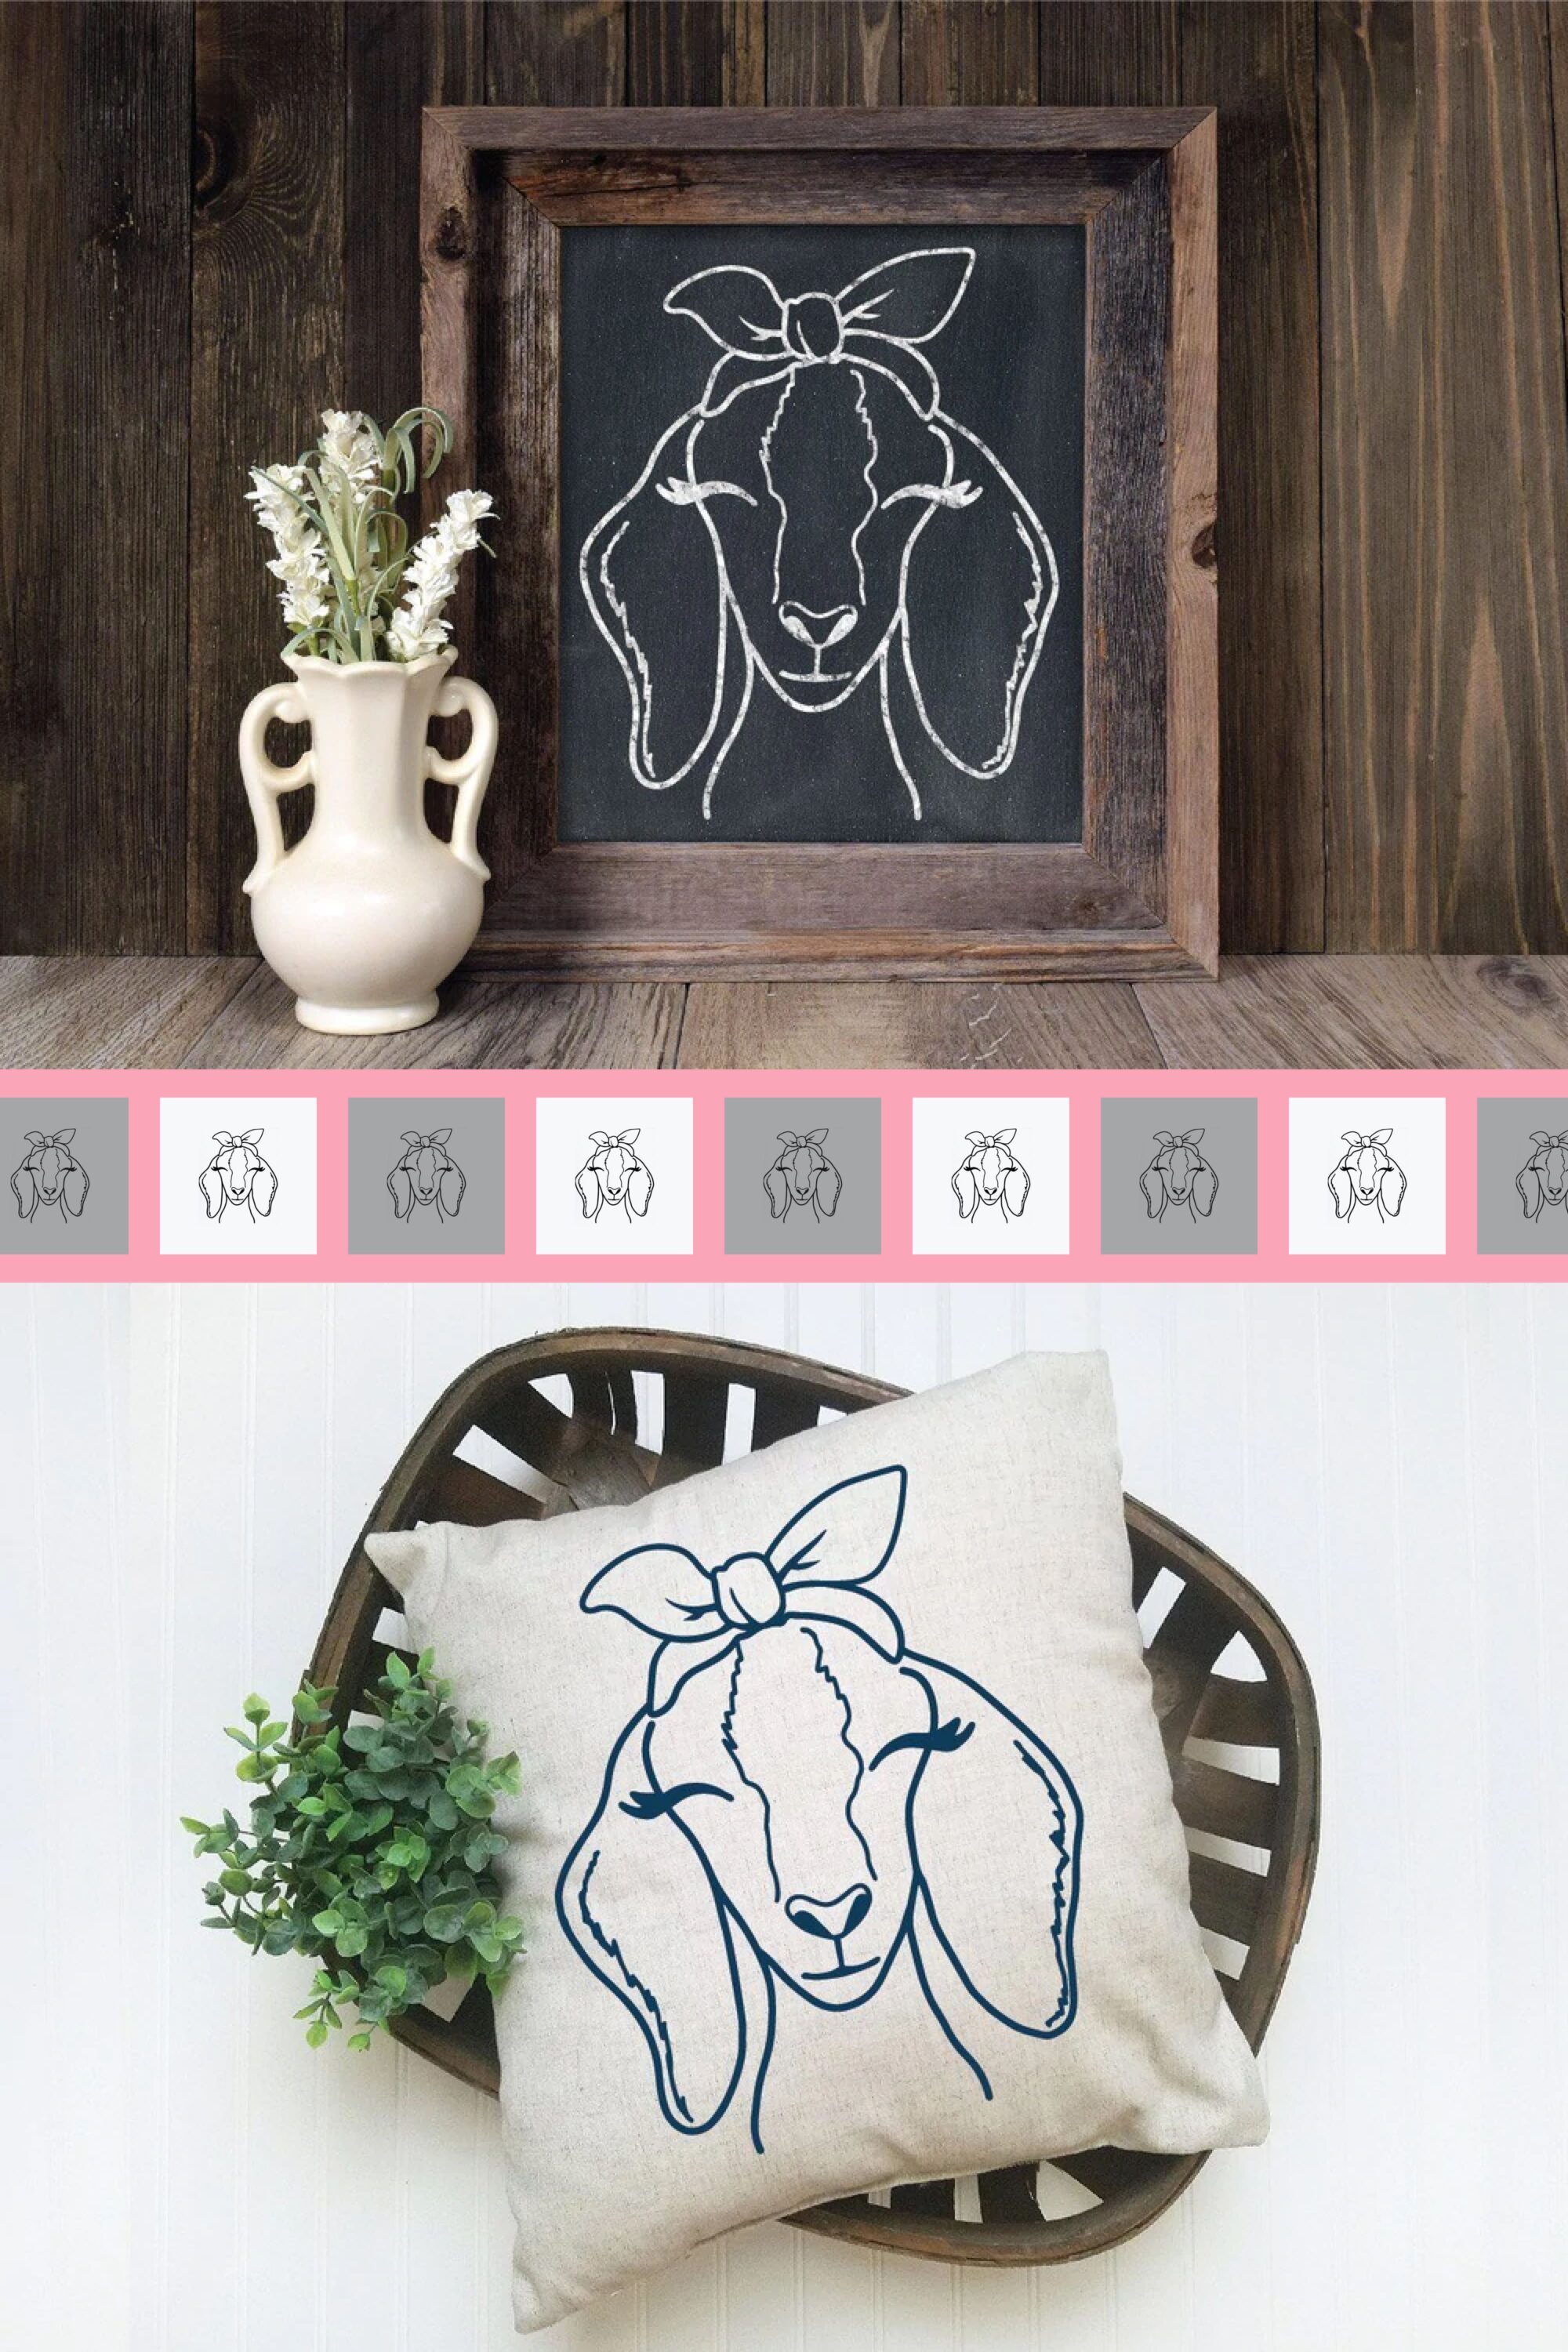 Picture of a cow pillow on a chair and a picture of a cow pillow.